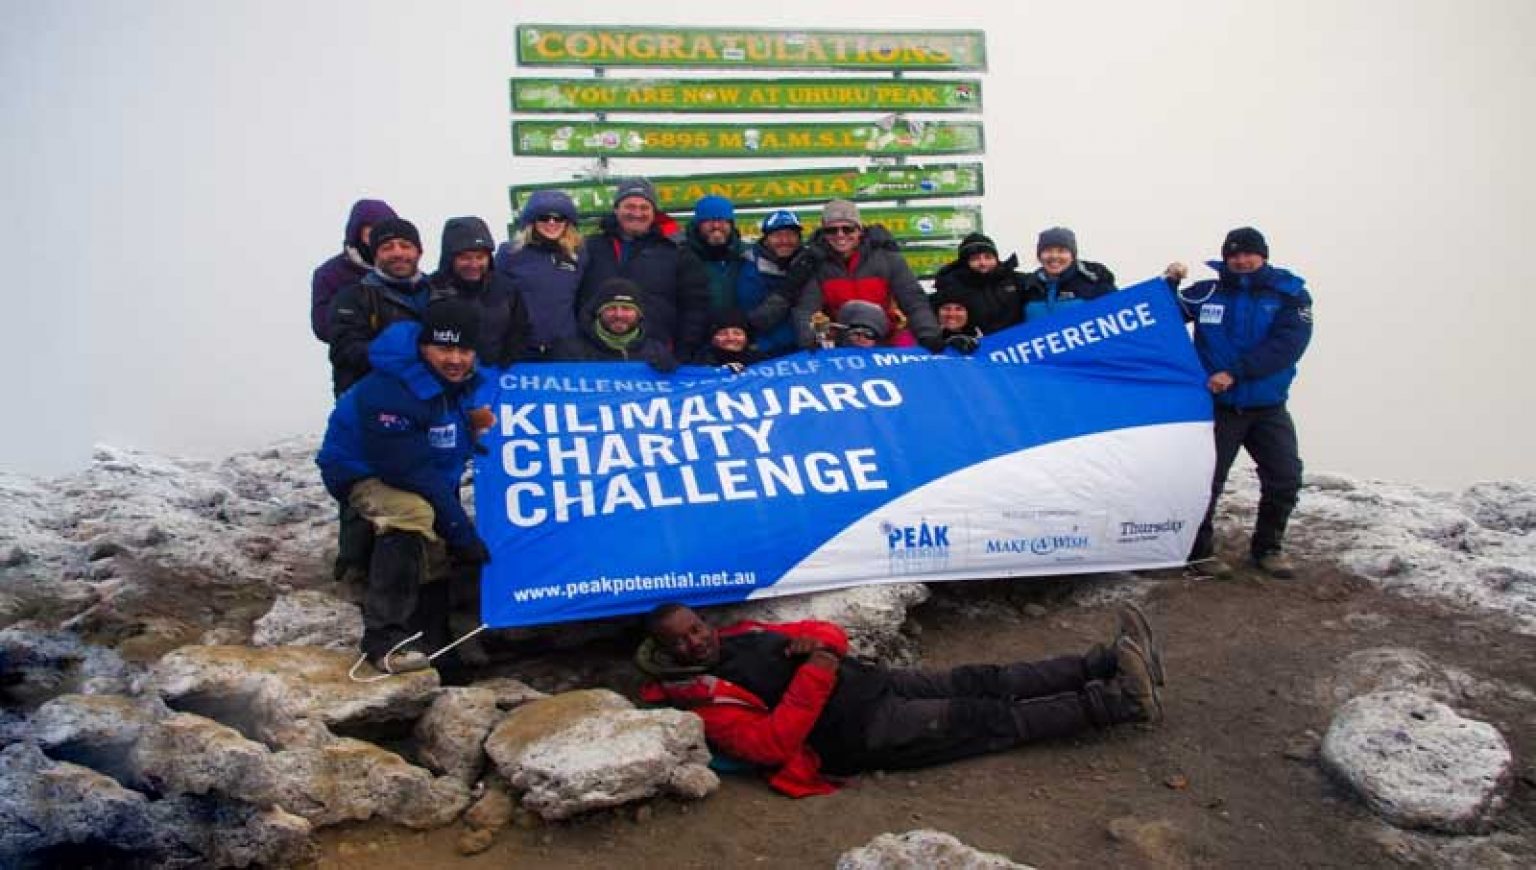 Climb Kilimanjaro for your favourite charity